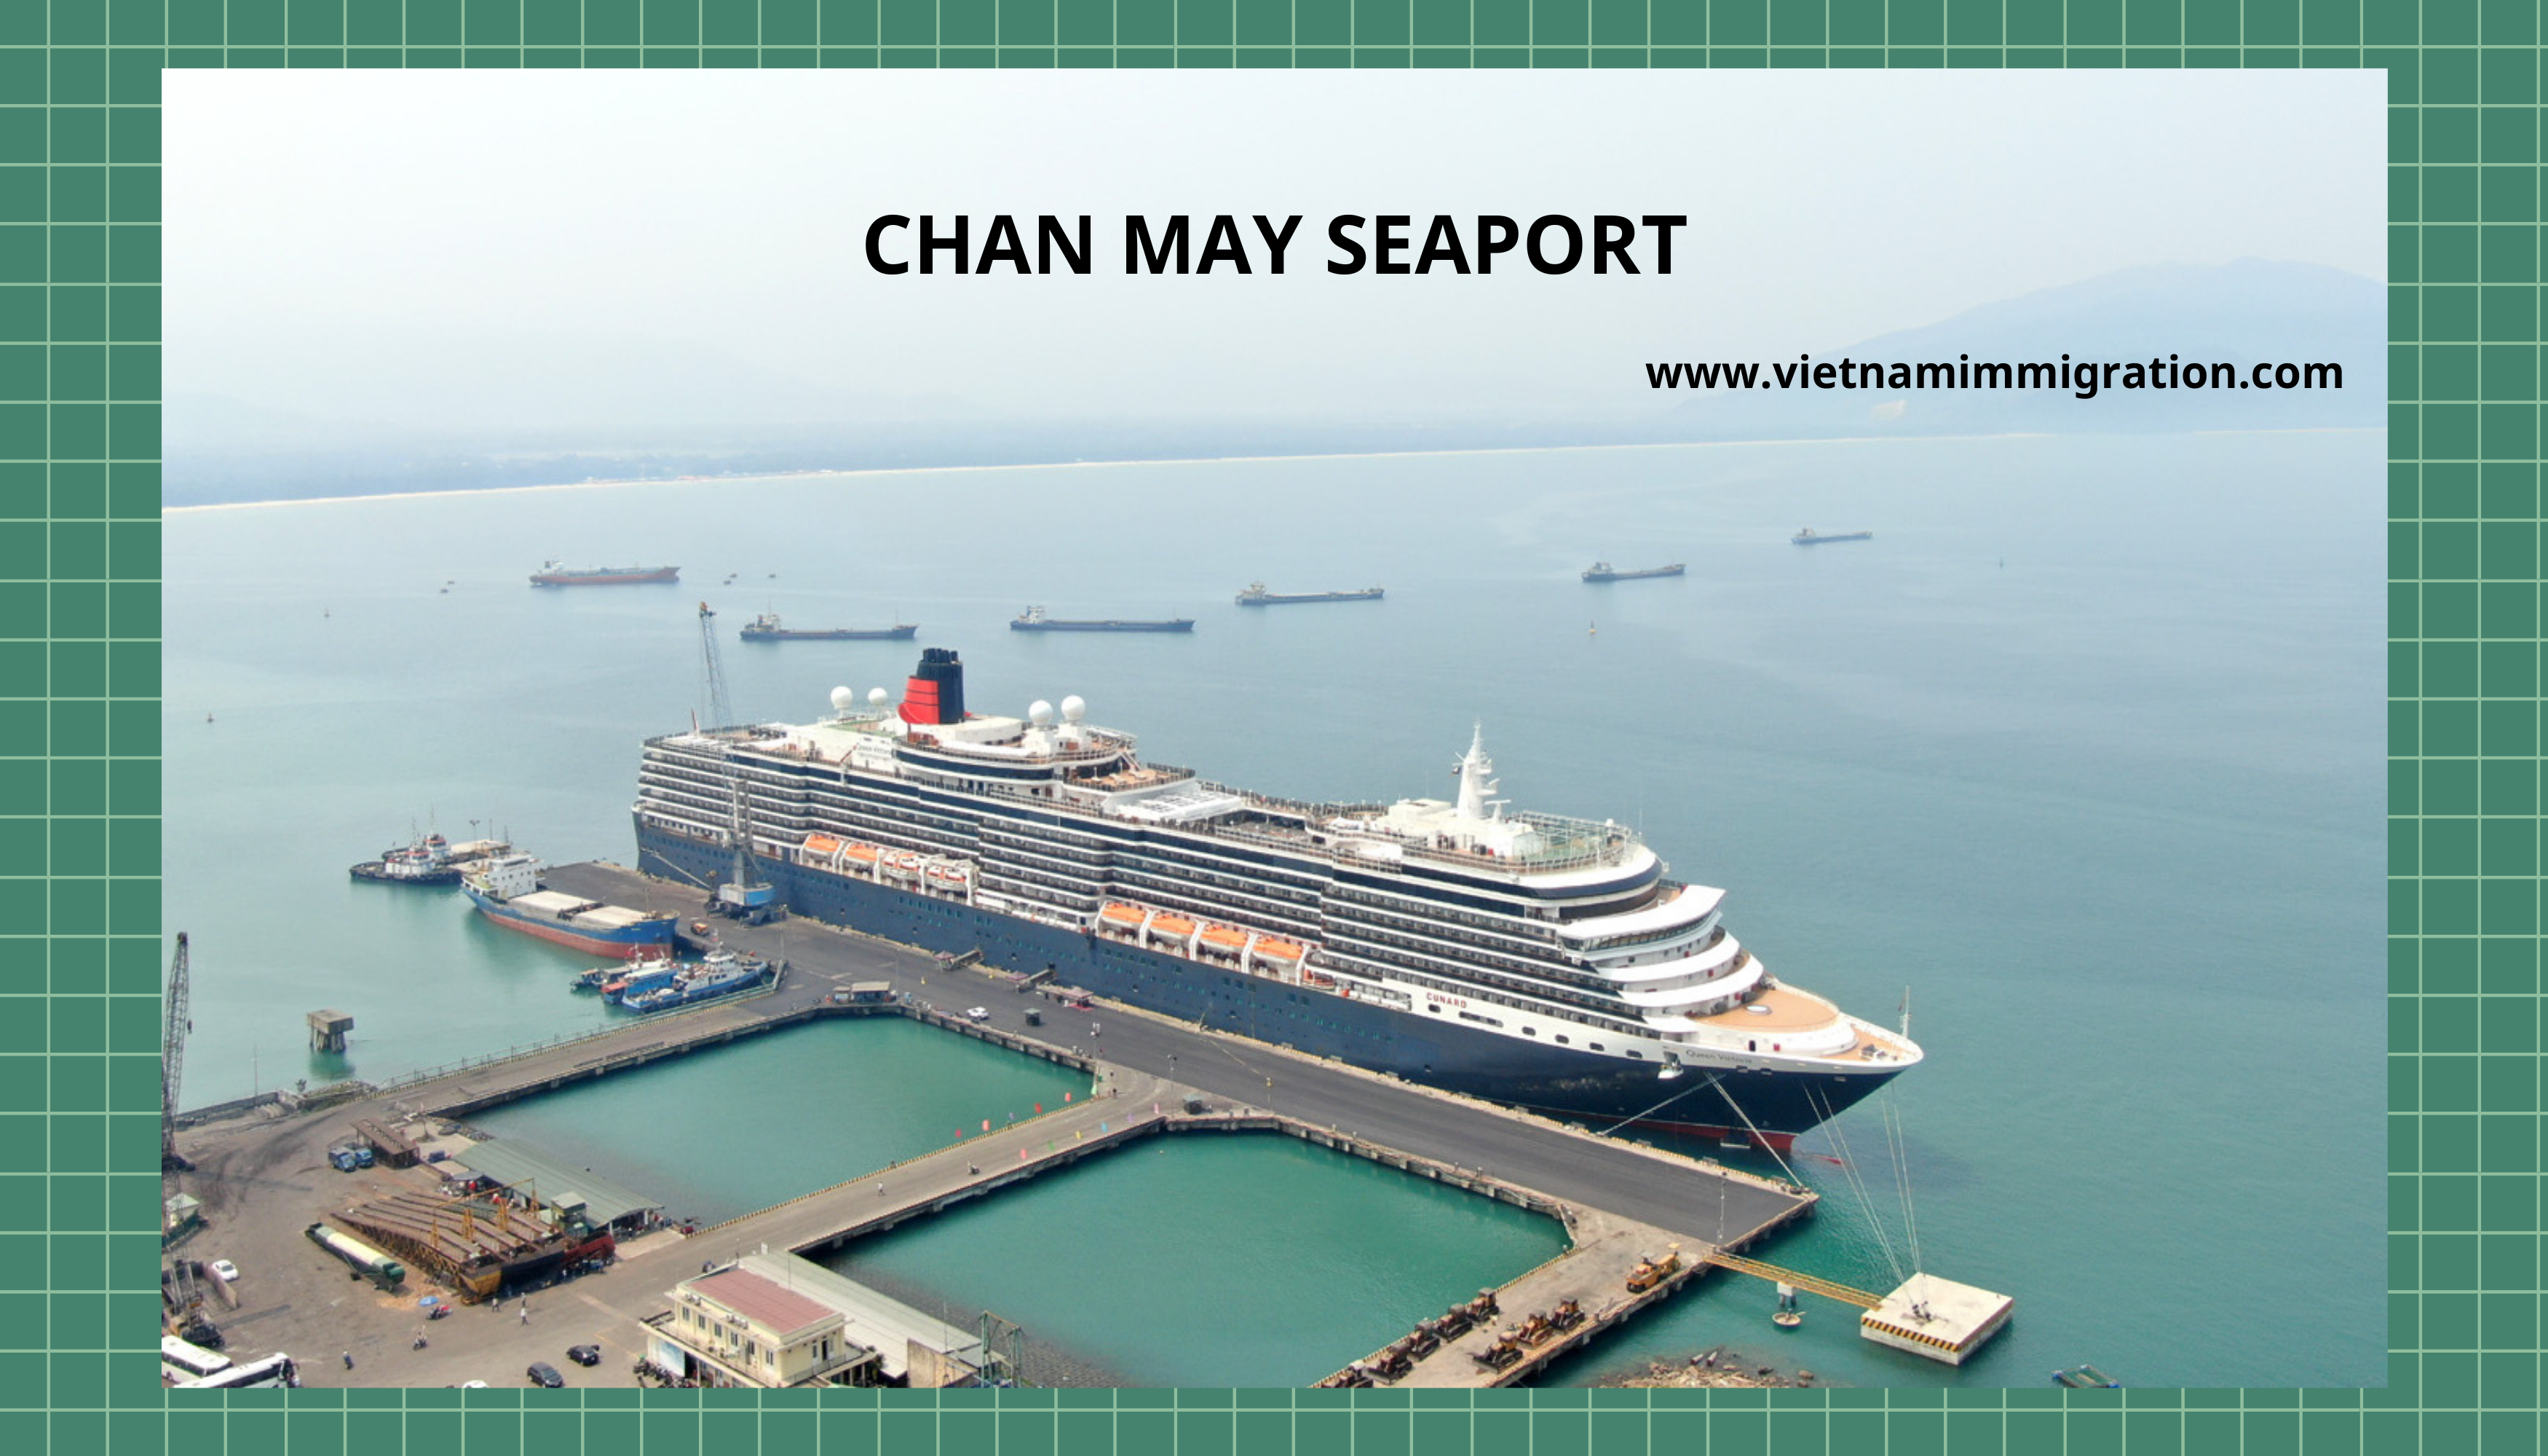 How to Apply for a Vietnam E-visa to Enter Chan May Seaport by Cruise Ships in 2024